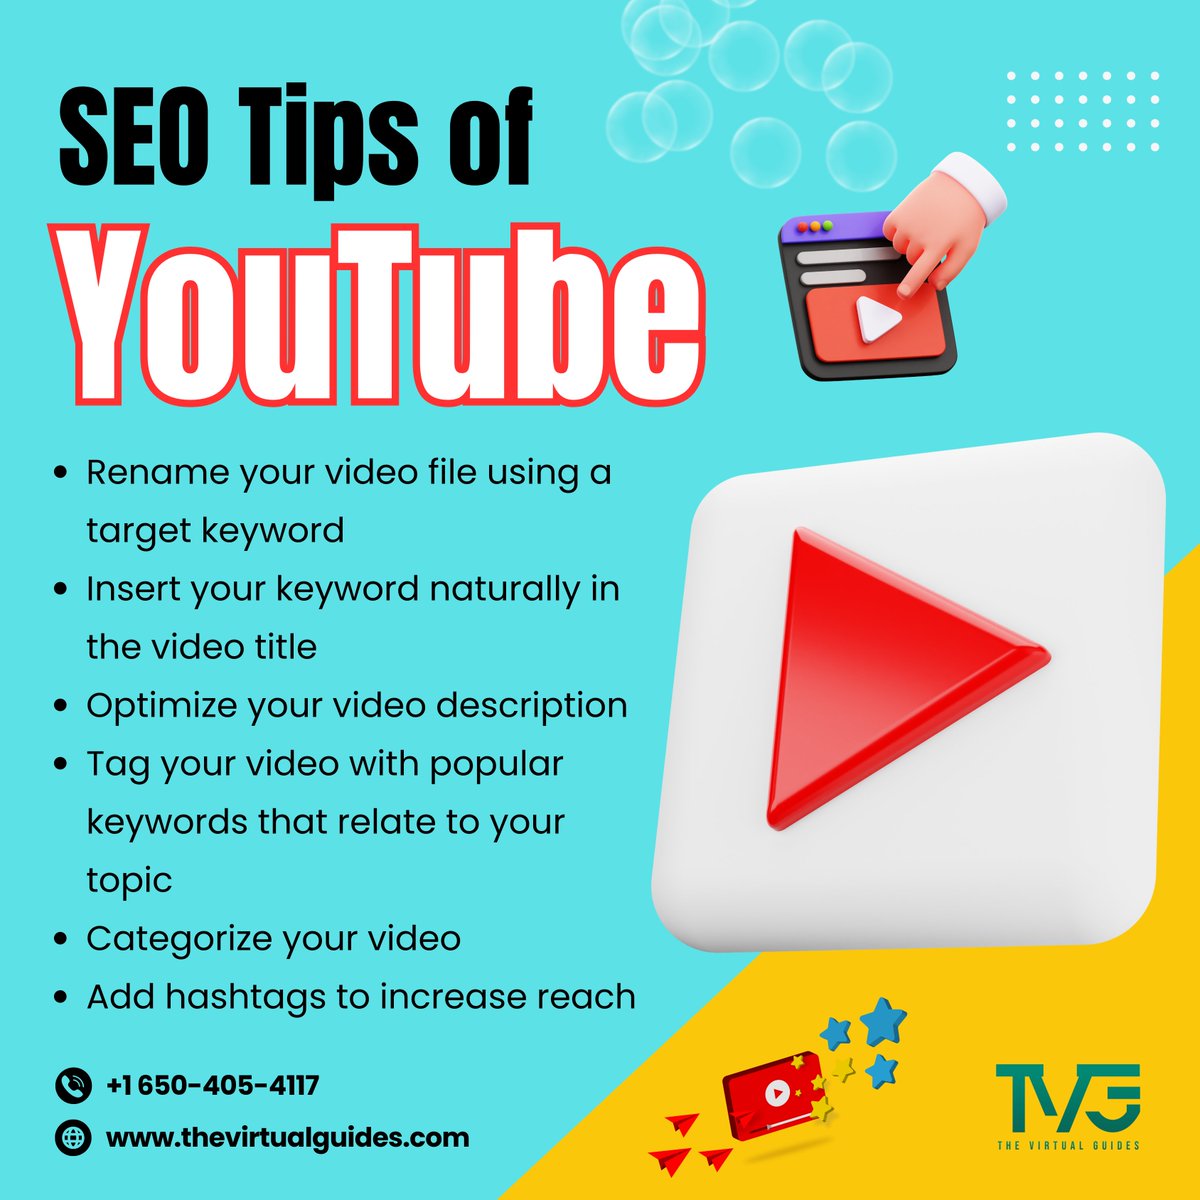 The Power of SEO for Your YouTube Channel!

Ready to dominate YouTube with killer SEO strategies? 🌟 Contact us today at +1 650-405-4117 or visit thevirtualguides.com to learn more!

#youtubemarketing #youtube #youtuber #digitalmarketing #youtubers #youtubechannel